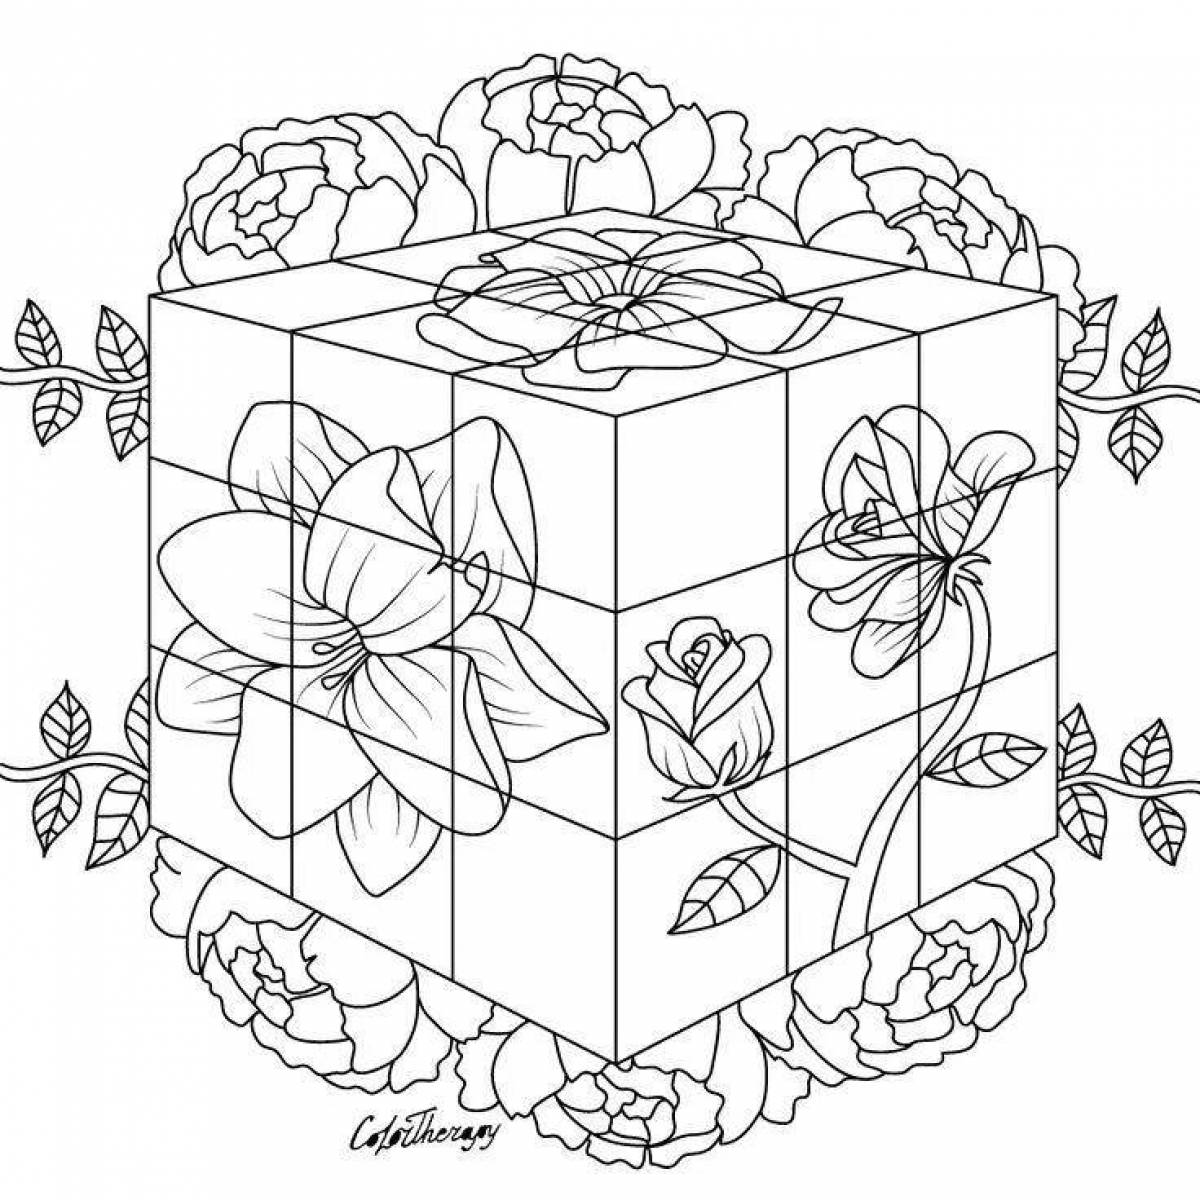 Fun cube coloring page